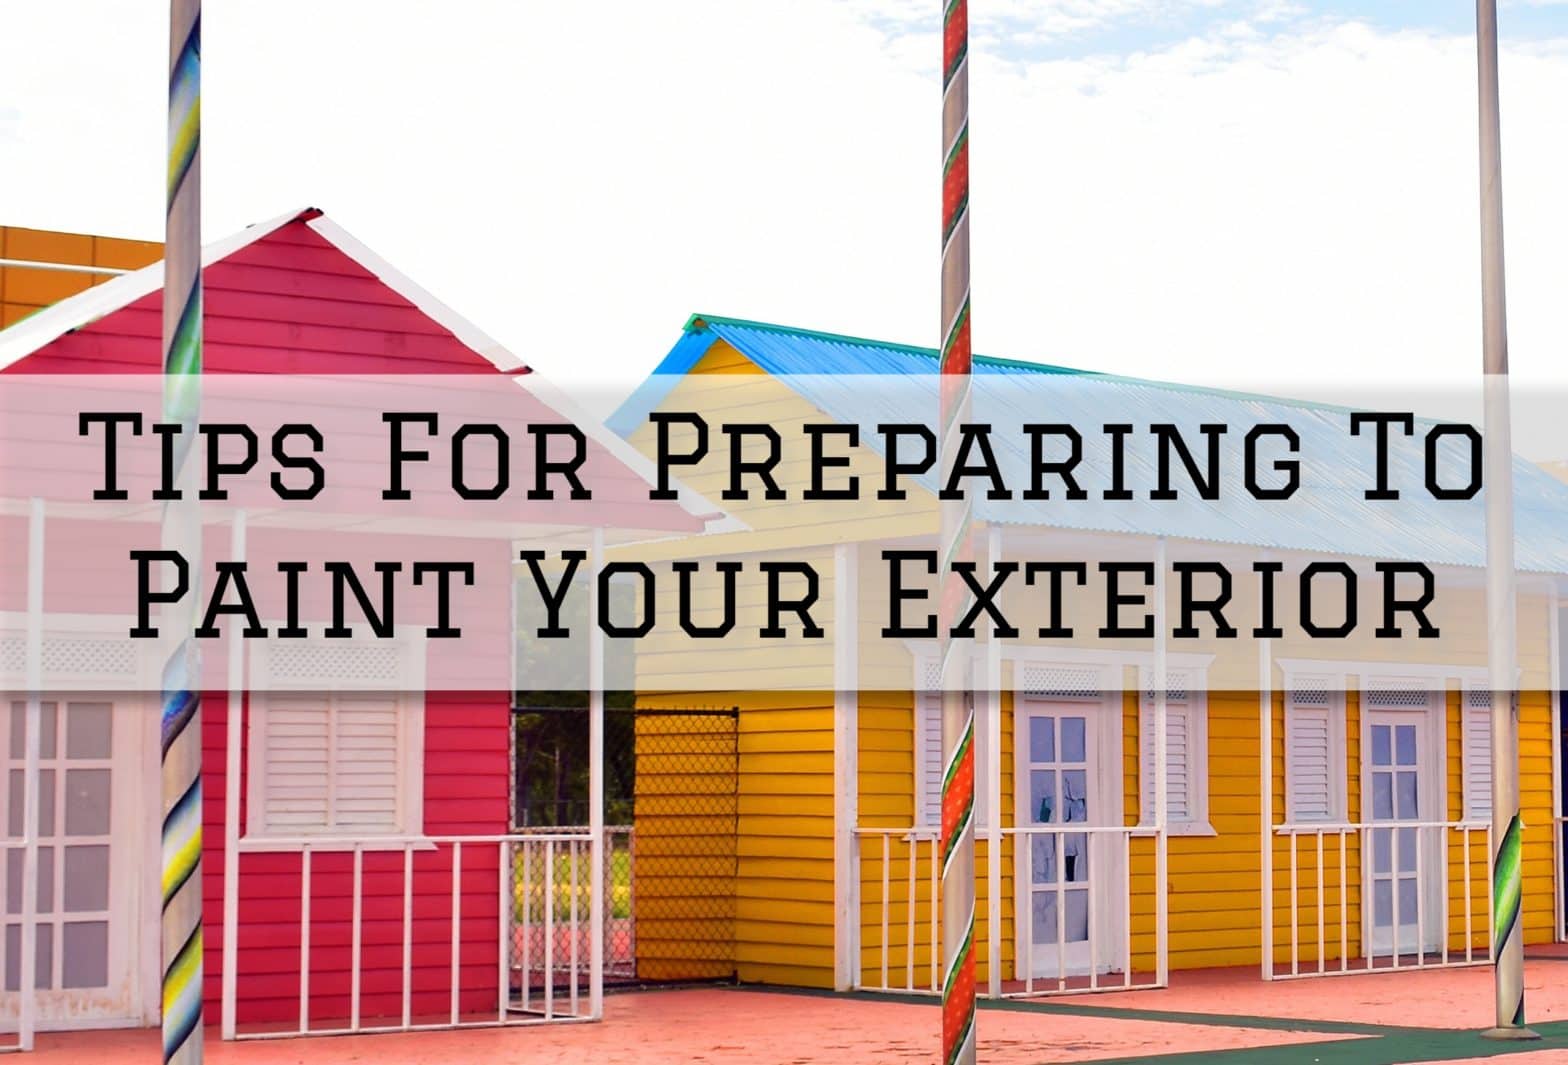 2022-06-15 Painting and Wallpapering Inc Burlington Ontario Tips For Preparing To Paint Your Exterior